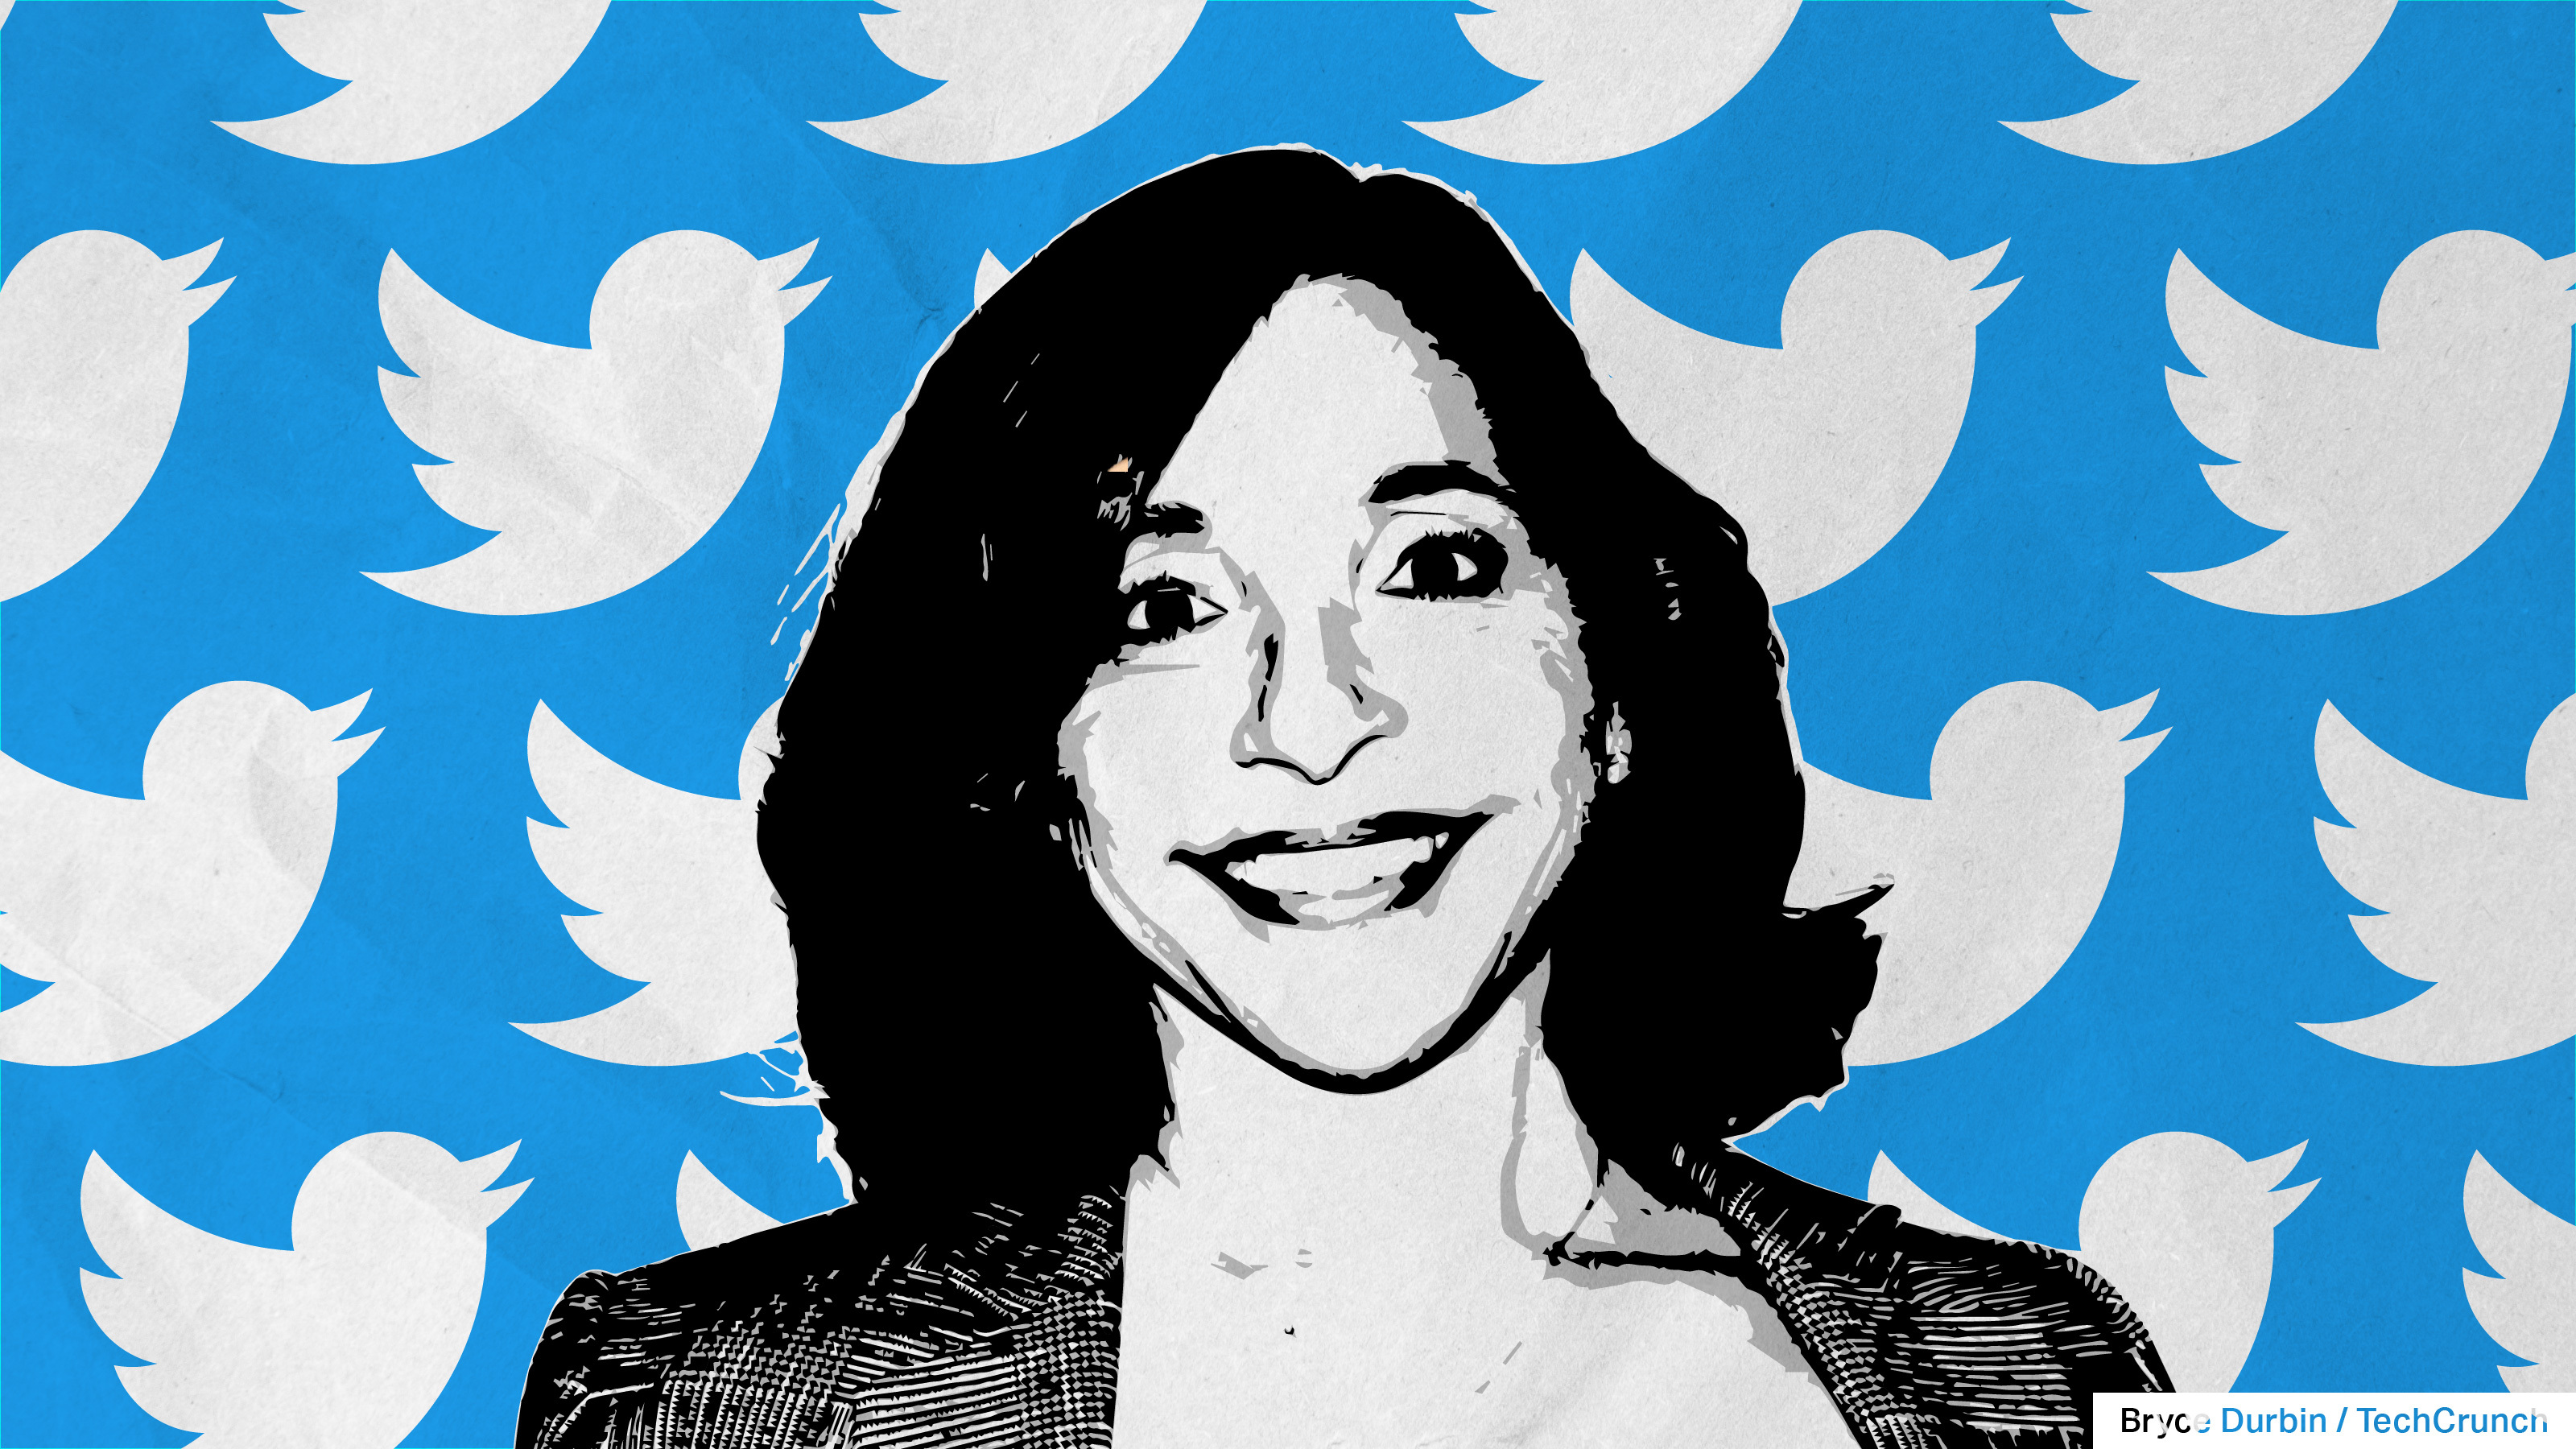 Image of Linda Yaccarino with the Twitter bird in the background, representing the new Twitter CEO